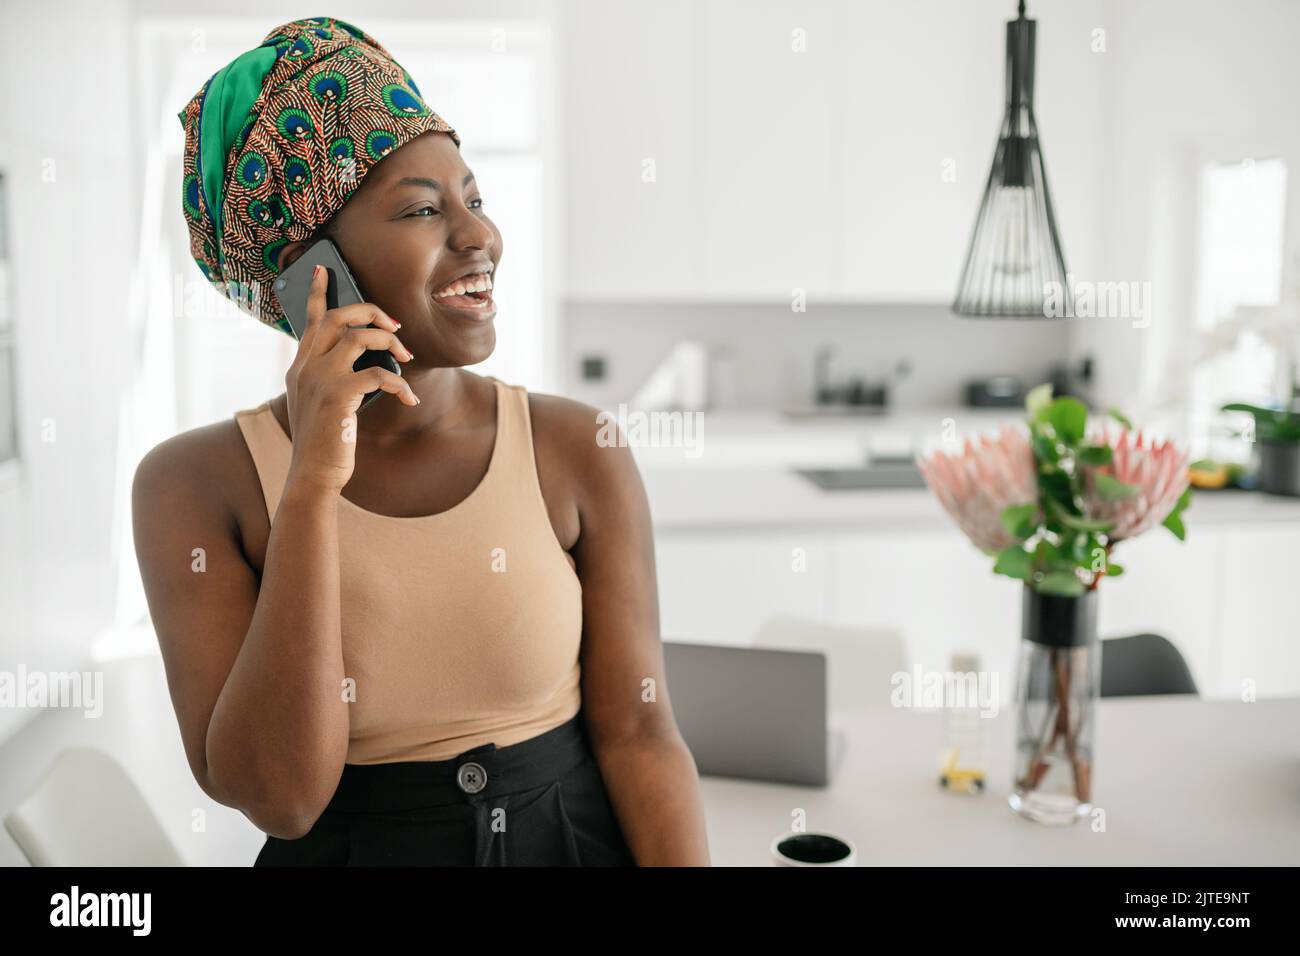 Beautiful Black African woman at home, smiling and laughing, using mobile smart phone, wearing traditional headscarf and looking into distance with co Stock Photo